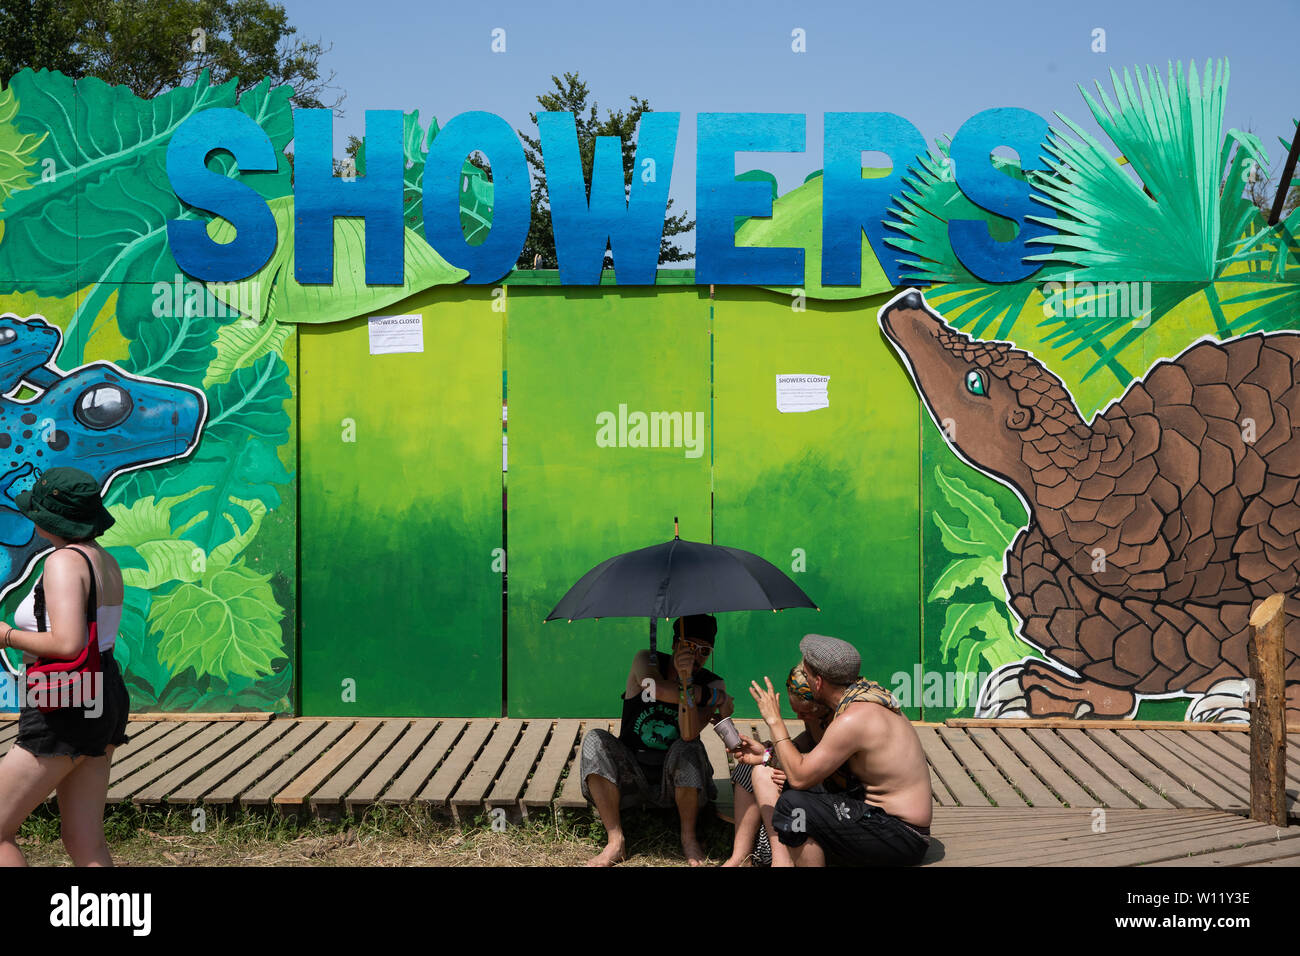 The Greenpeace showers shut to let reservoirs refill at Glastonbury  Festival at Worthy Farm in Pilton, Somerset Stock Photo - Alamy